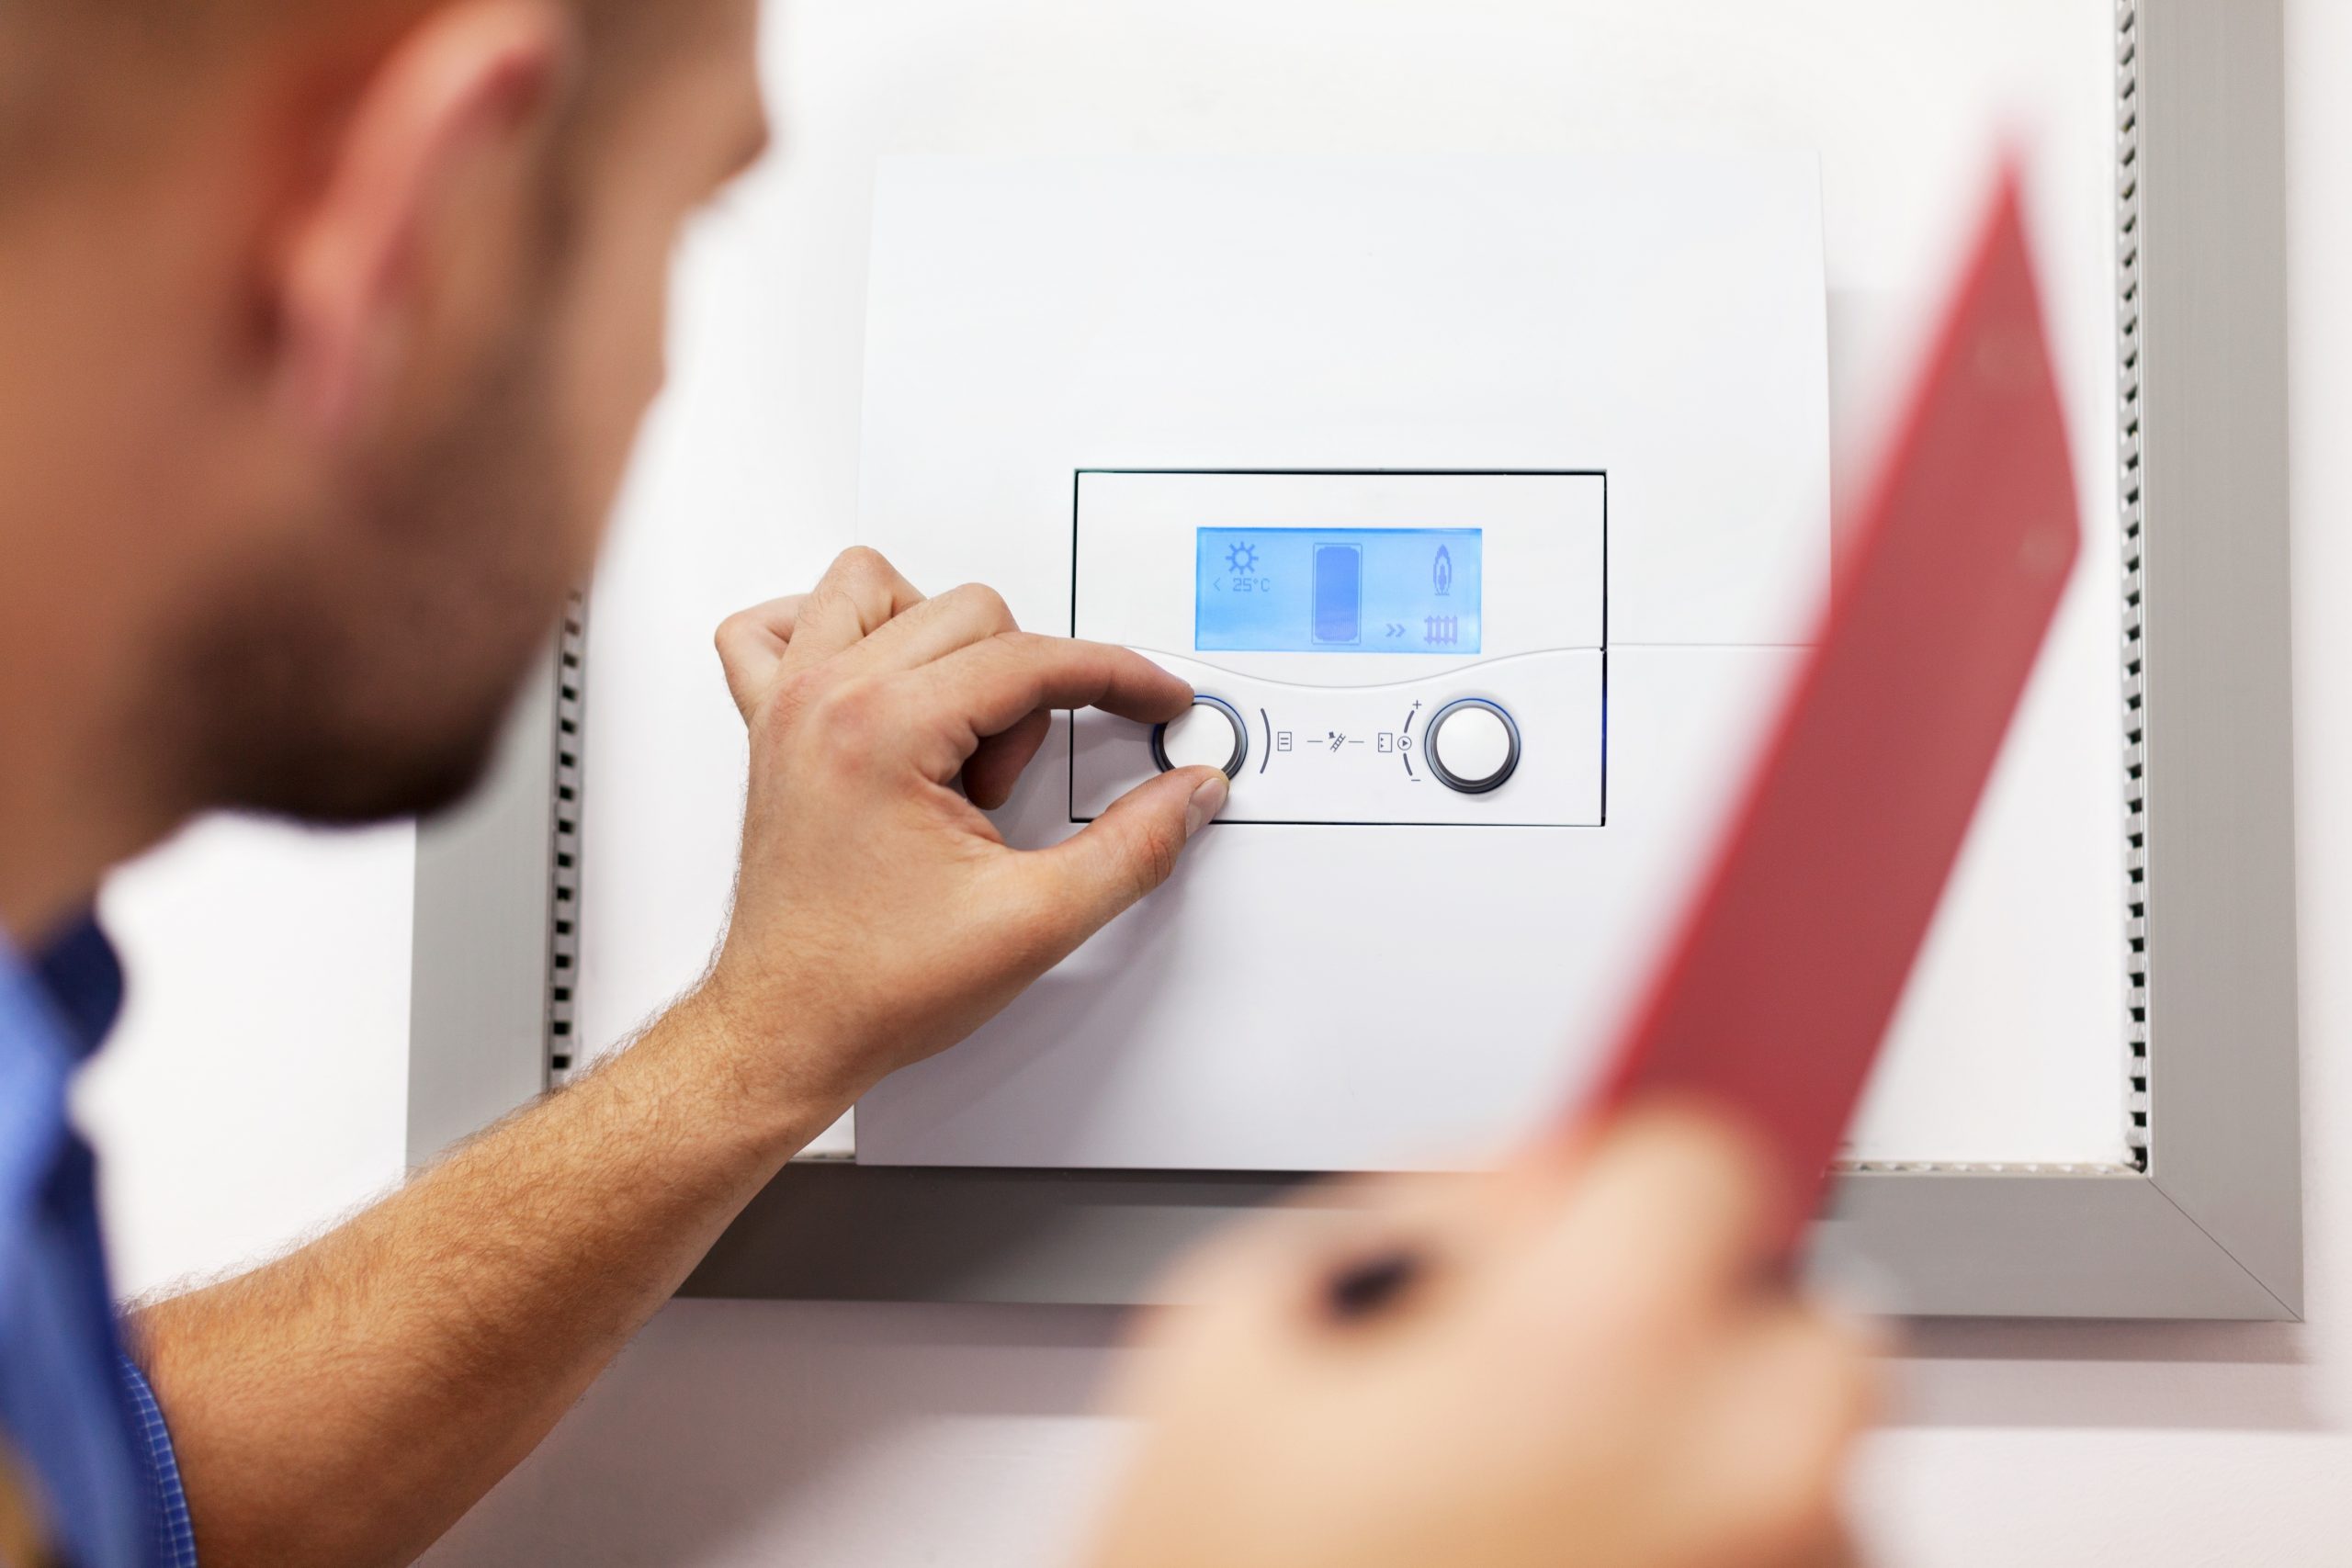 BRITS COULD BE LEFT IN THE COLD THIS WINTER AS DEMAND FOR BOILERS PLUNGES BY 34% @RatedPeople